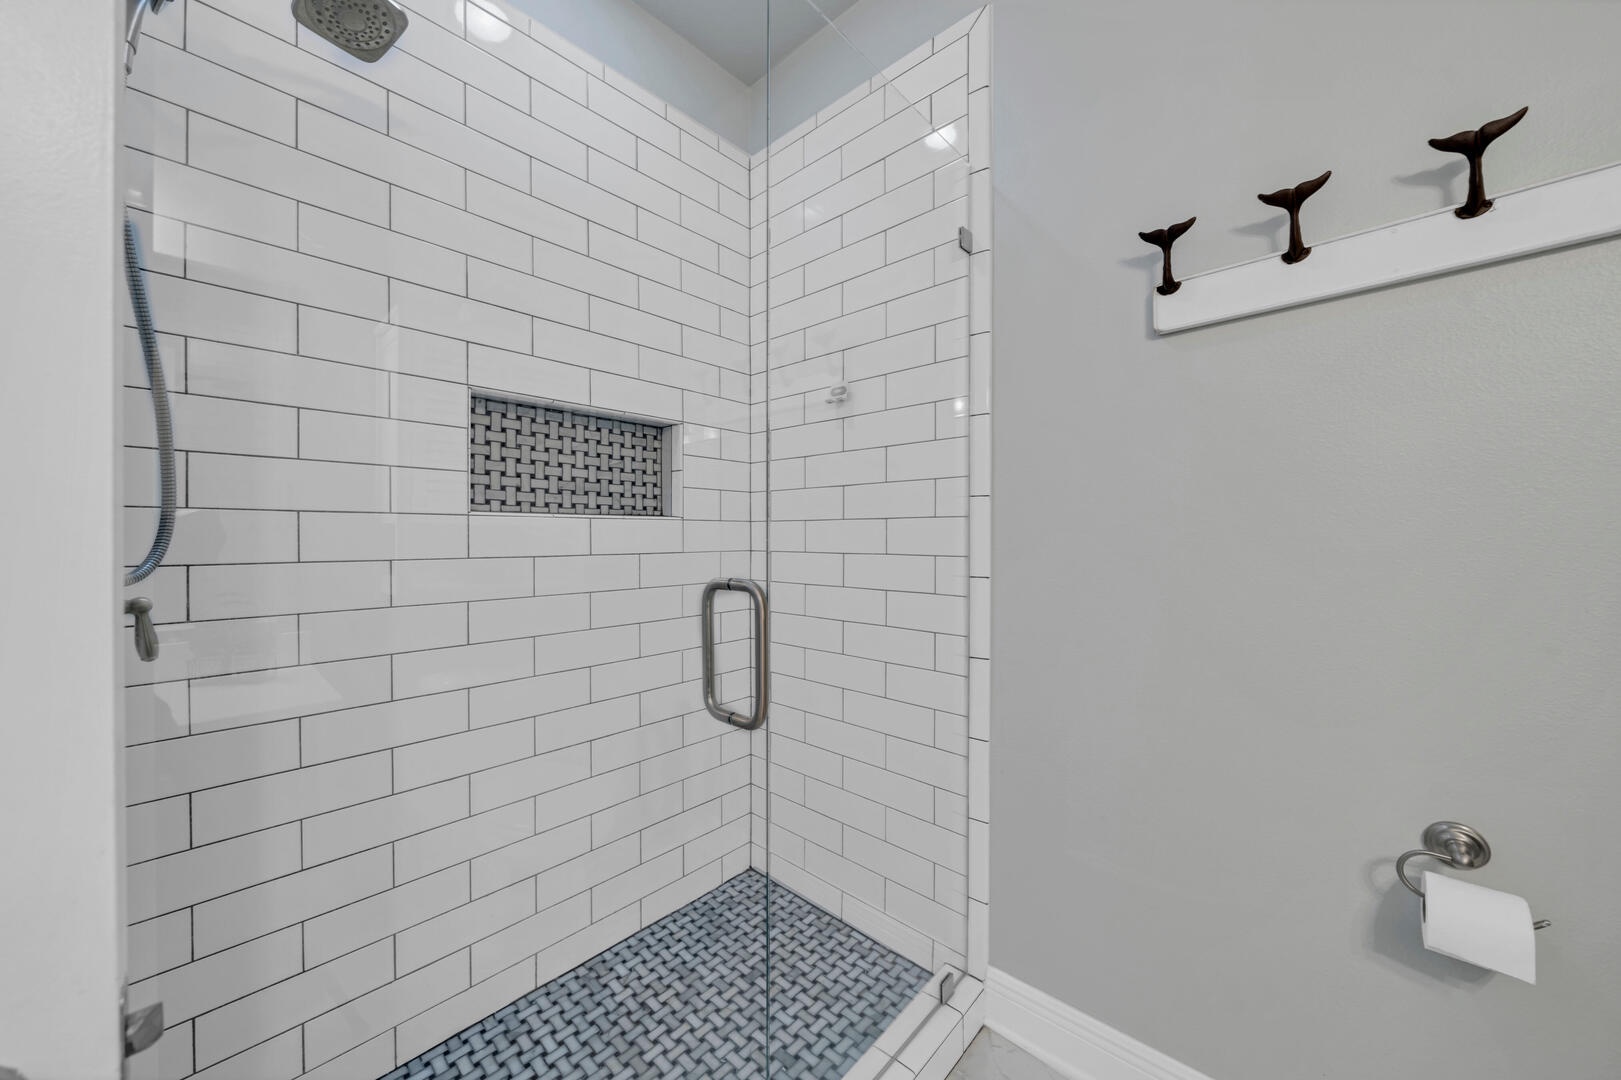 The full-sized bathroom with walk-in shower!